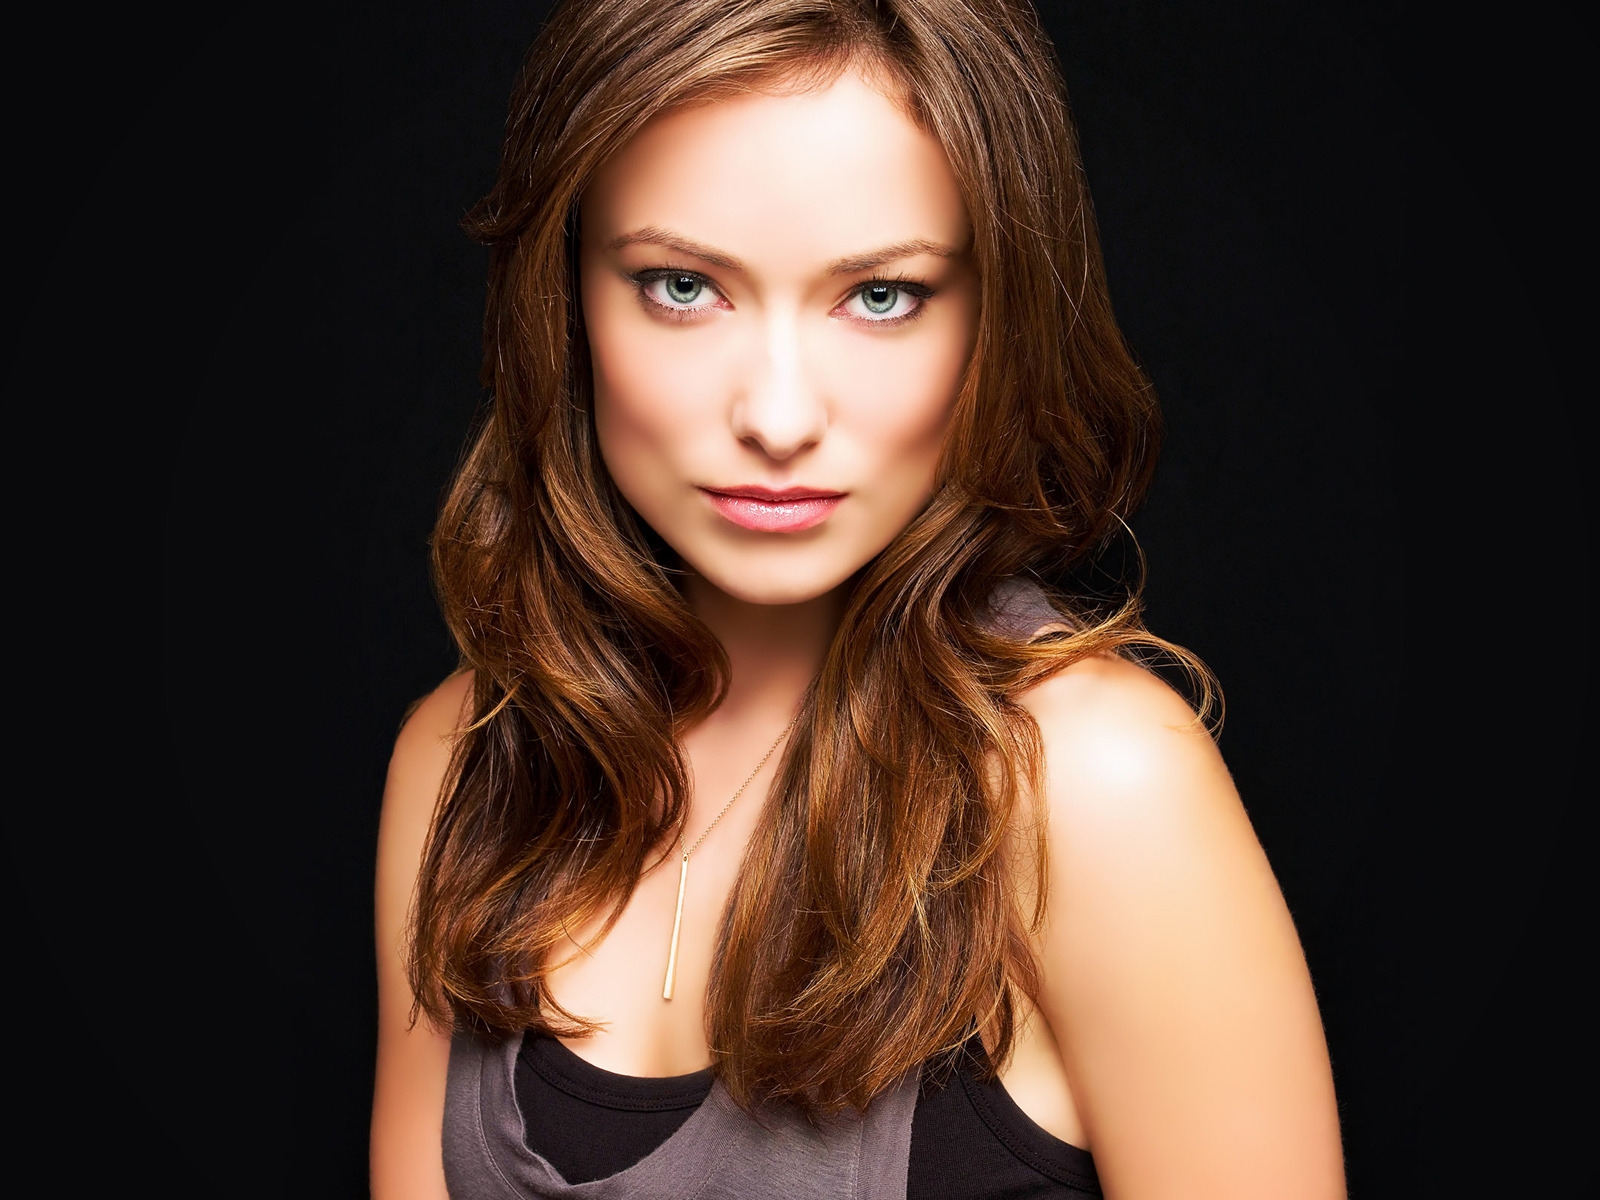 Olivia Wilde Look for 1600 x 1200 resolution